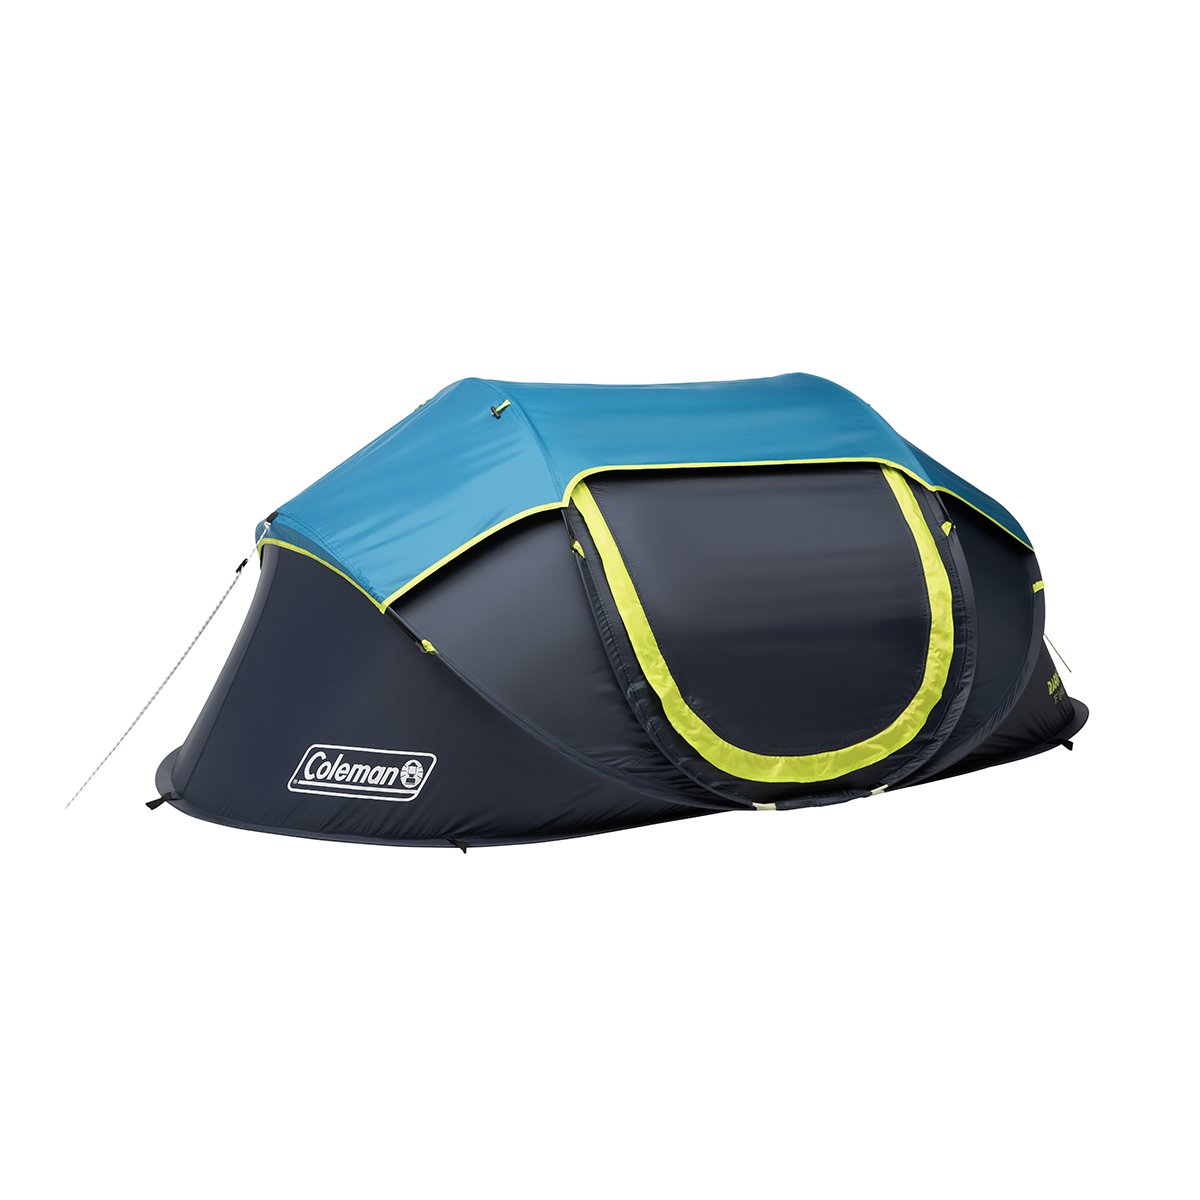 COLEMAN POP-UP TENT 2 PERSON WITH DARK ROOM TECHNOLOGY